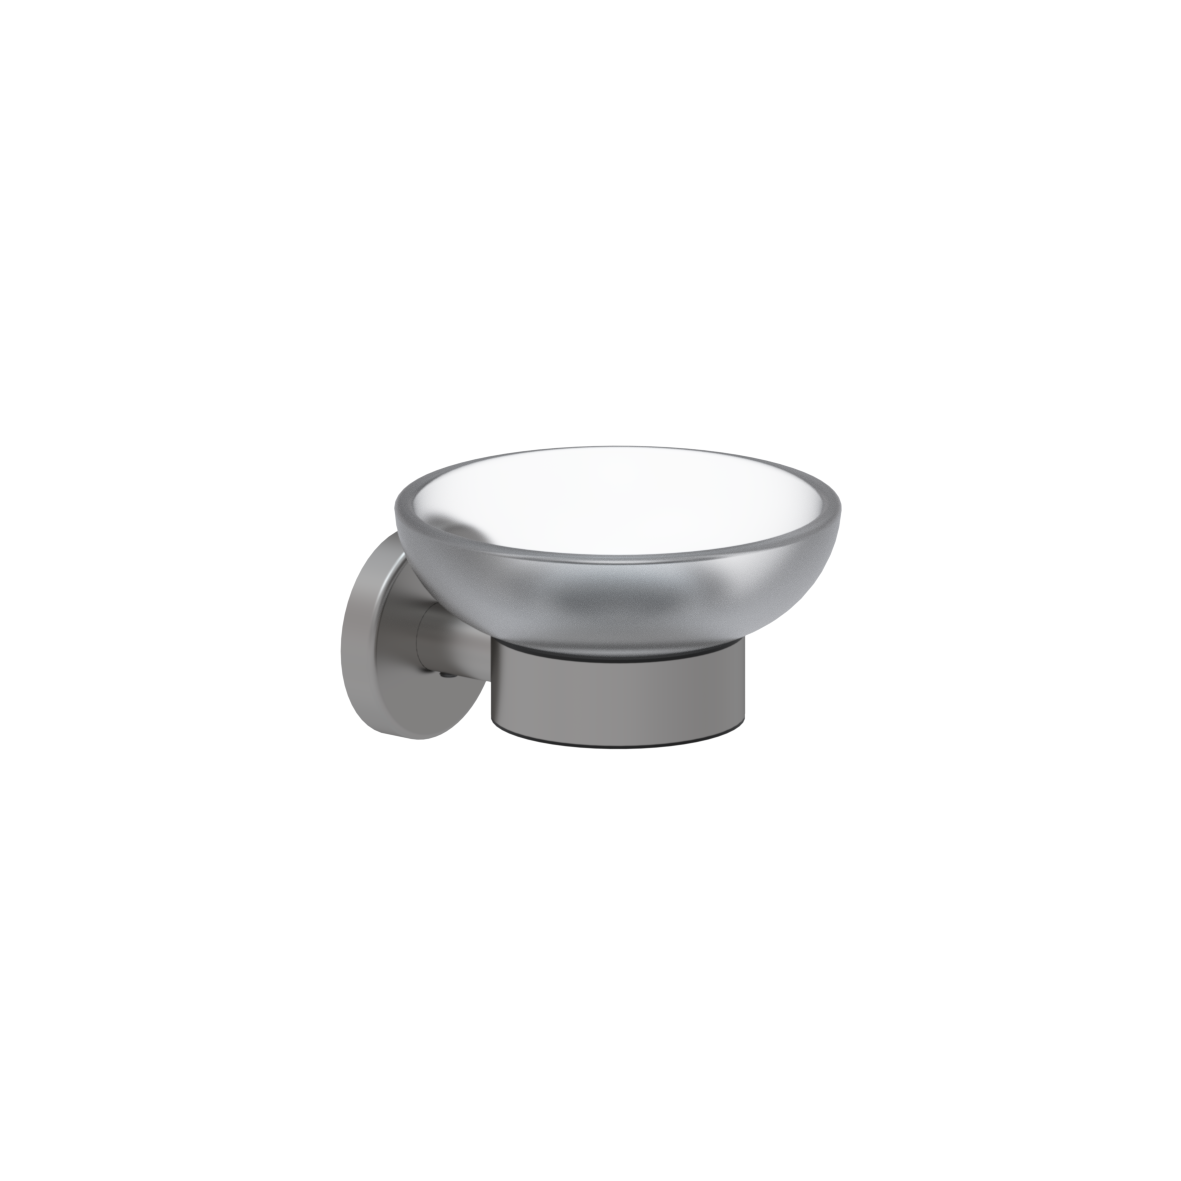 Inox Care Soap dish, 185 x 175 x 60 mm, Stainless steel